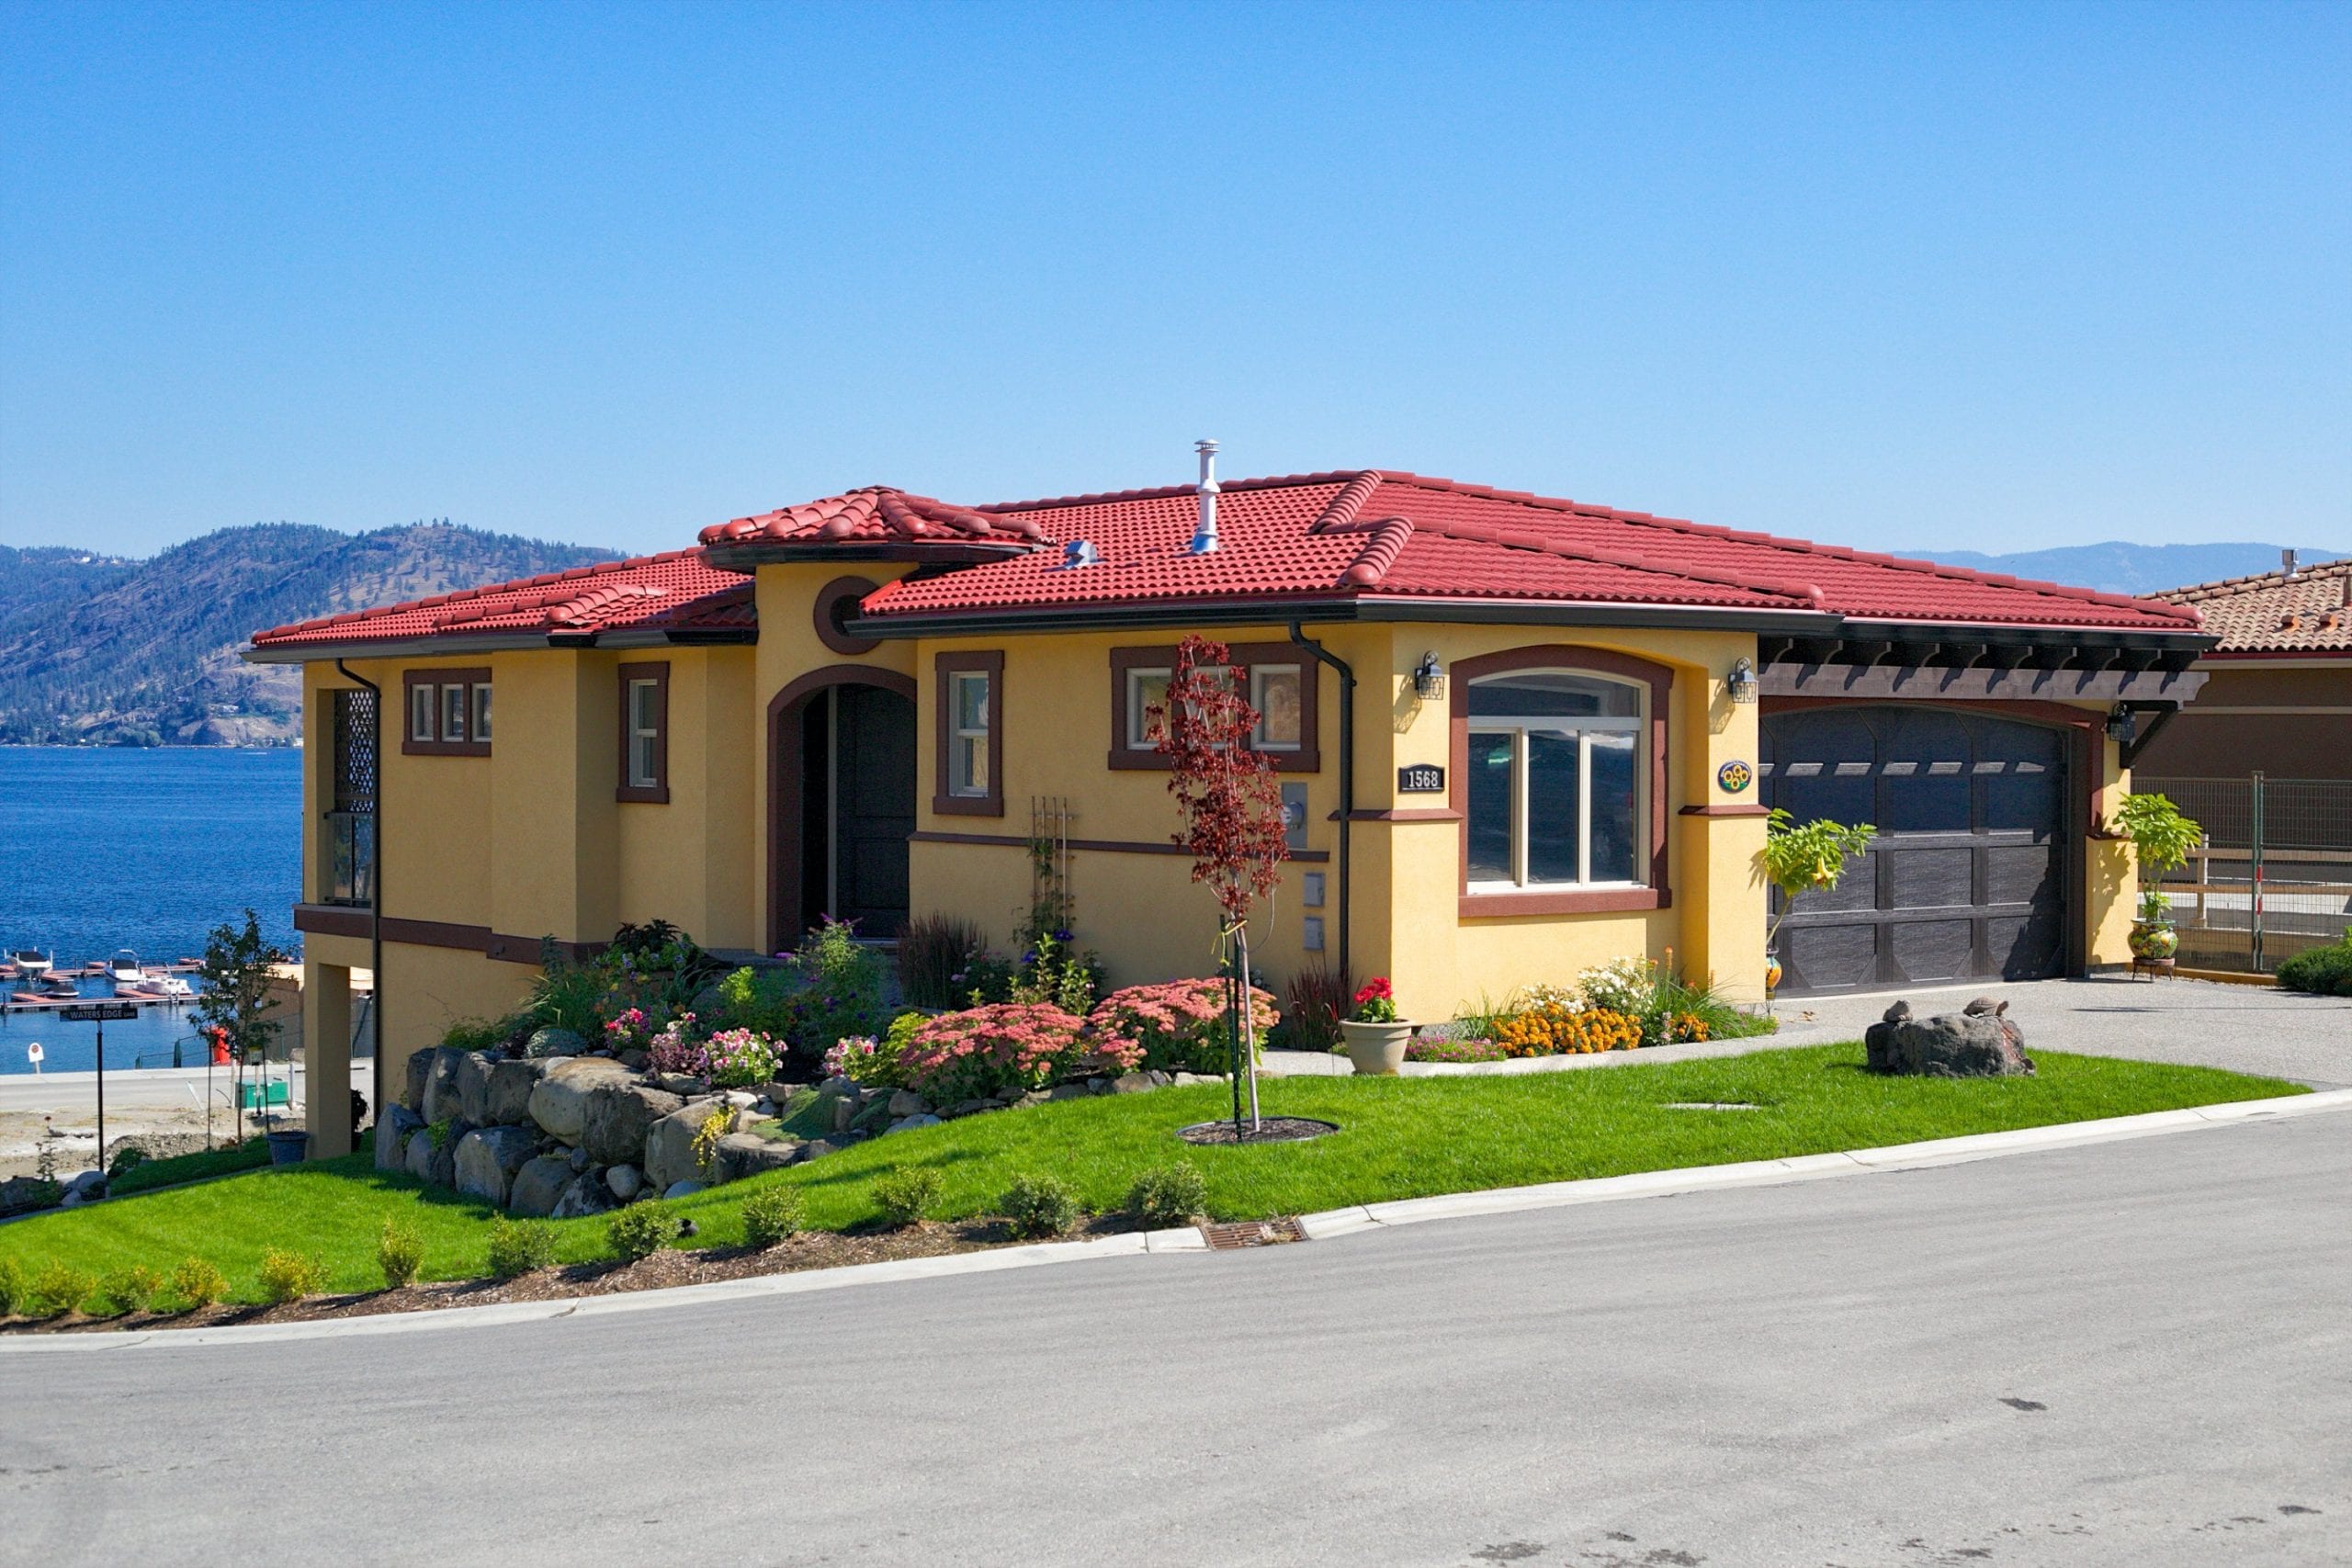 exterior shot of chardonnay roofed home with parmesan main body overlooking okanagan lake on a clear day